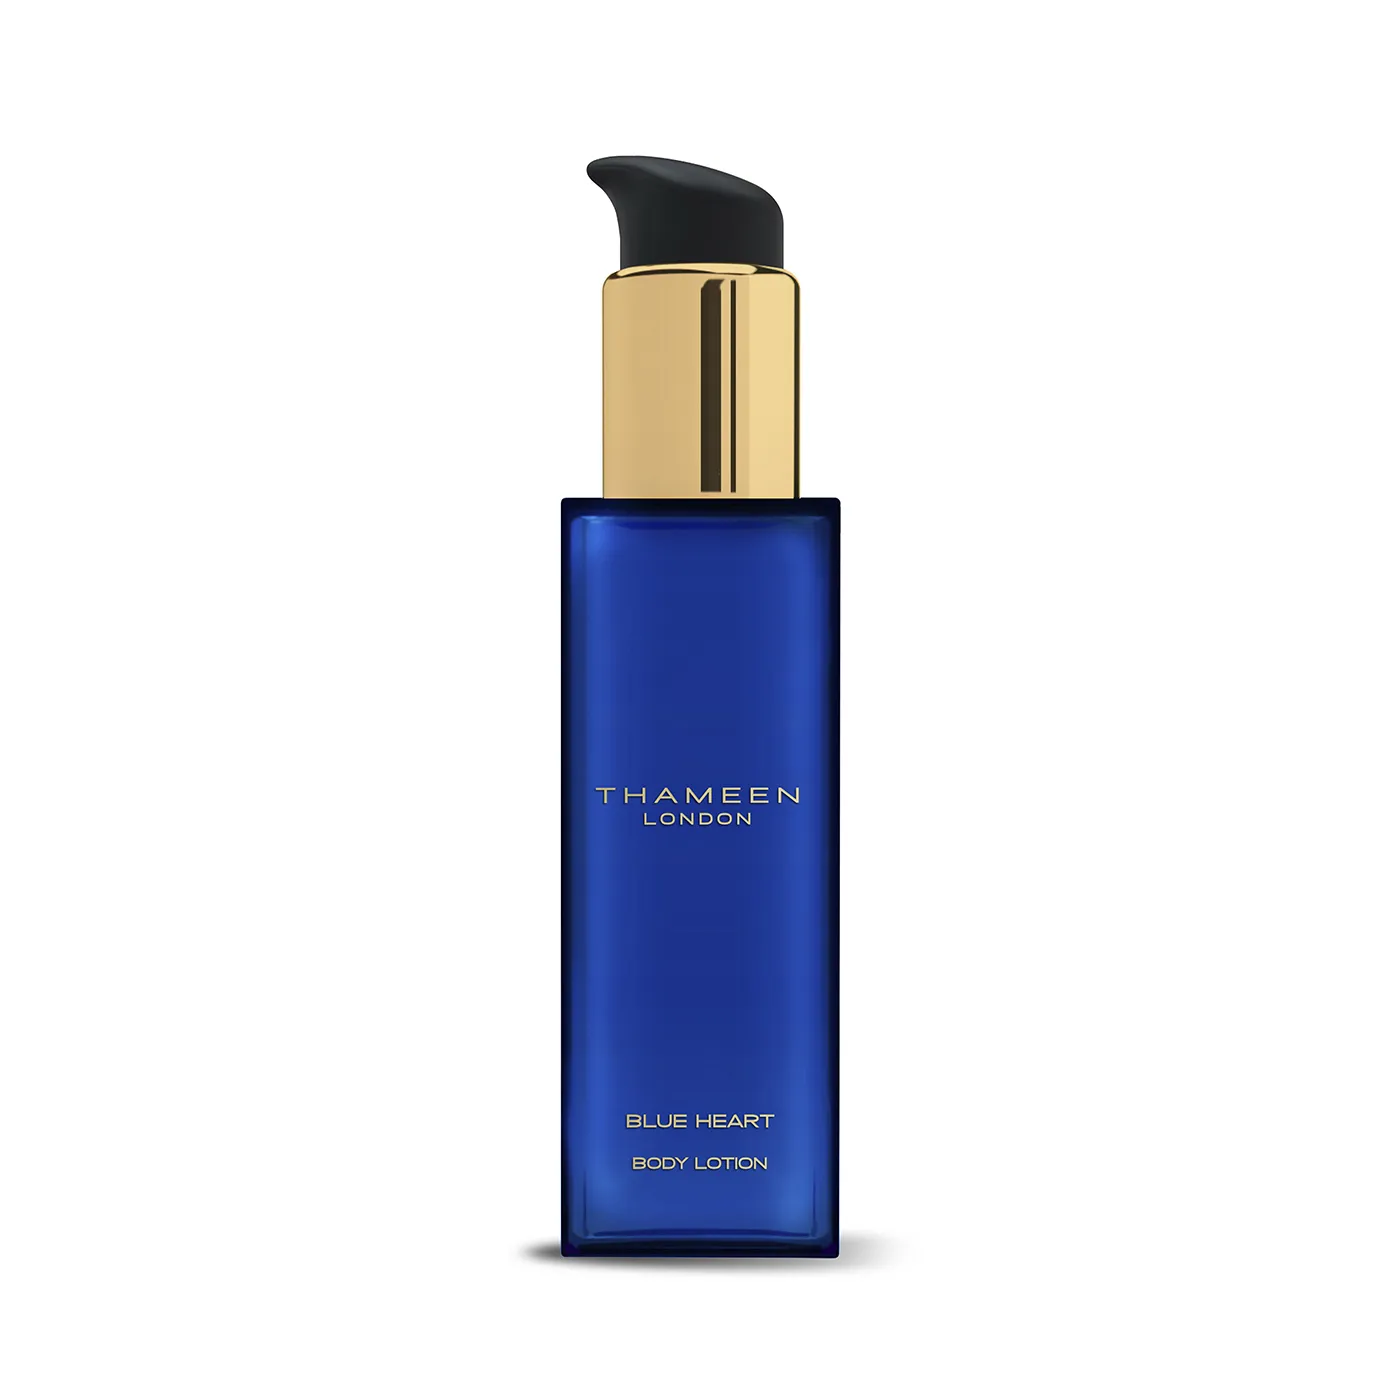 Thameen London - Blue Heart - Body Lotion 